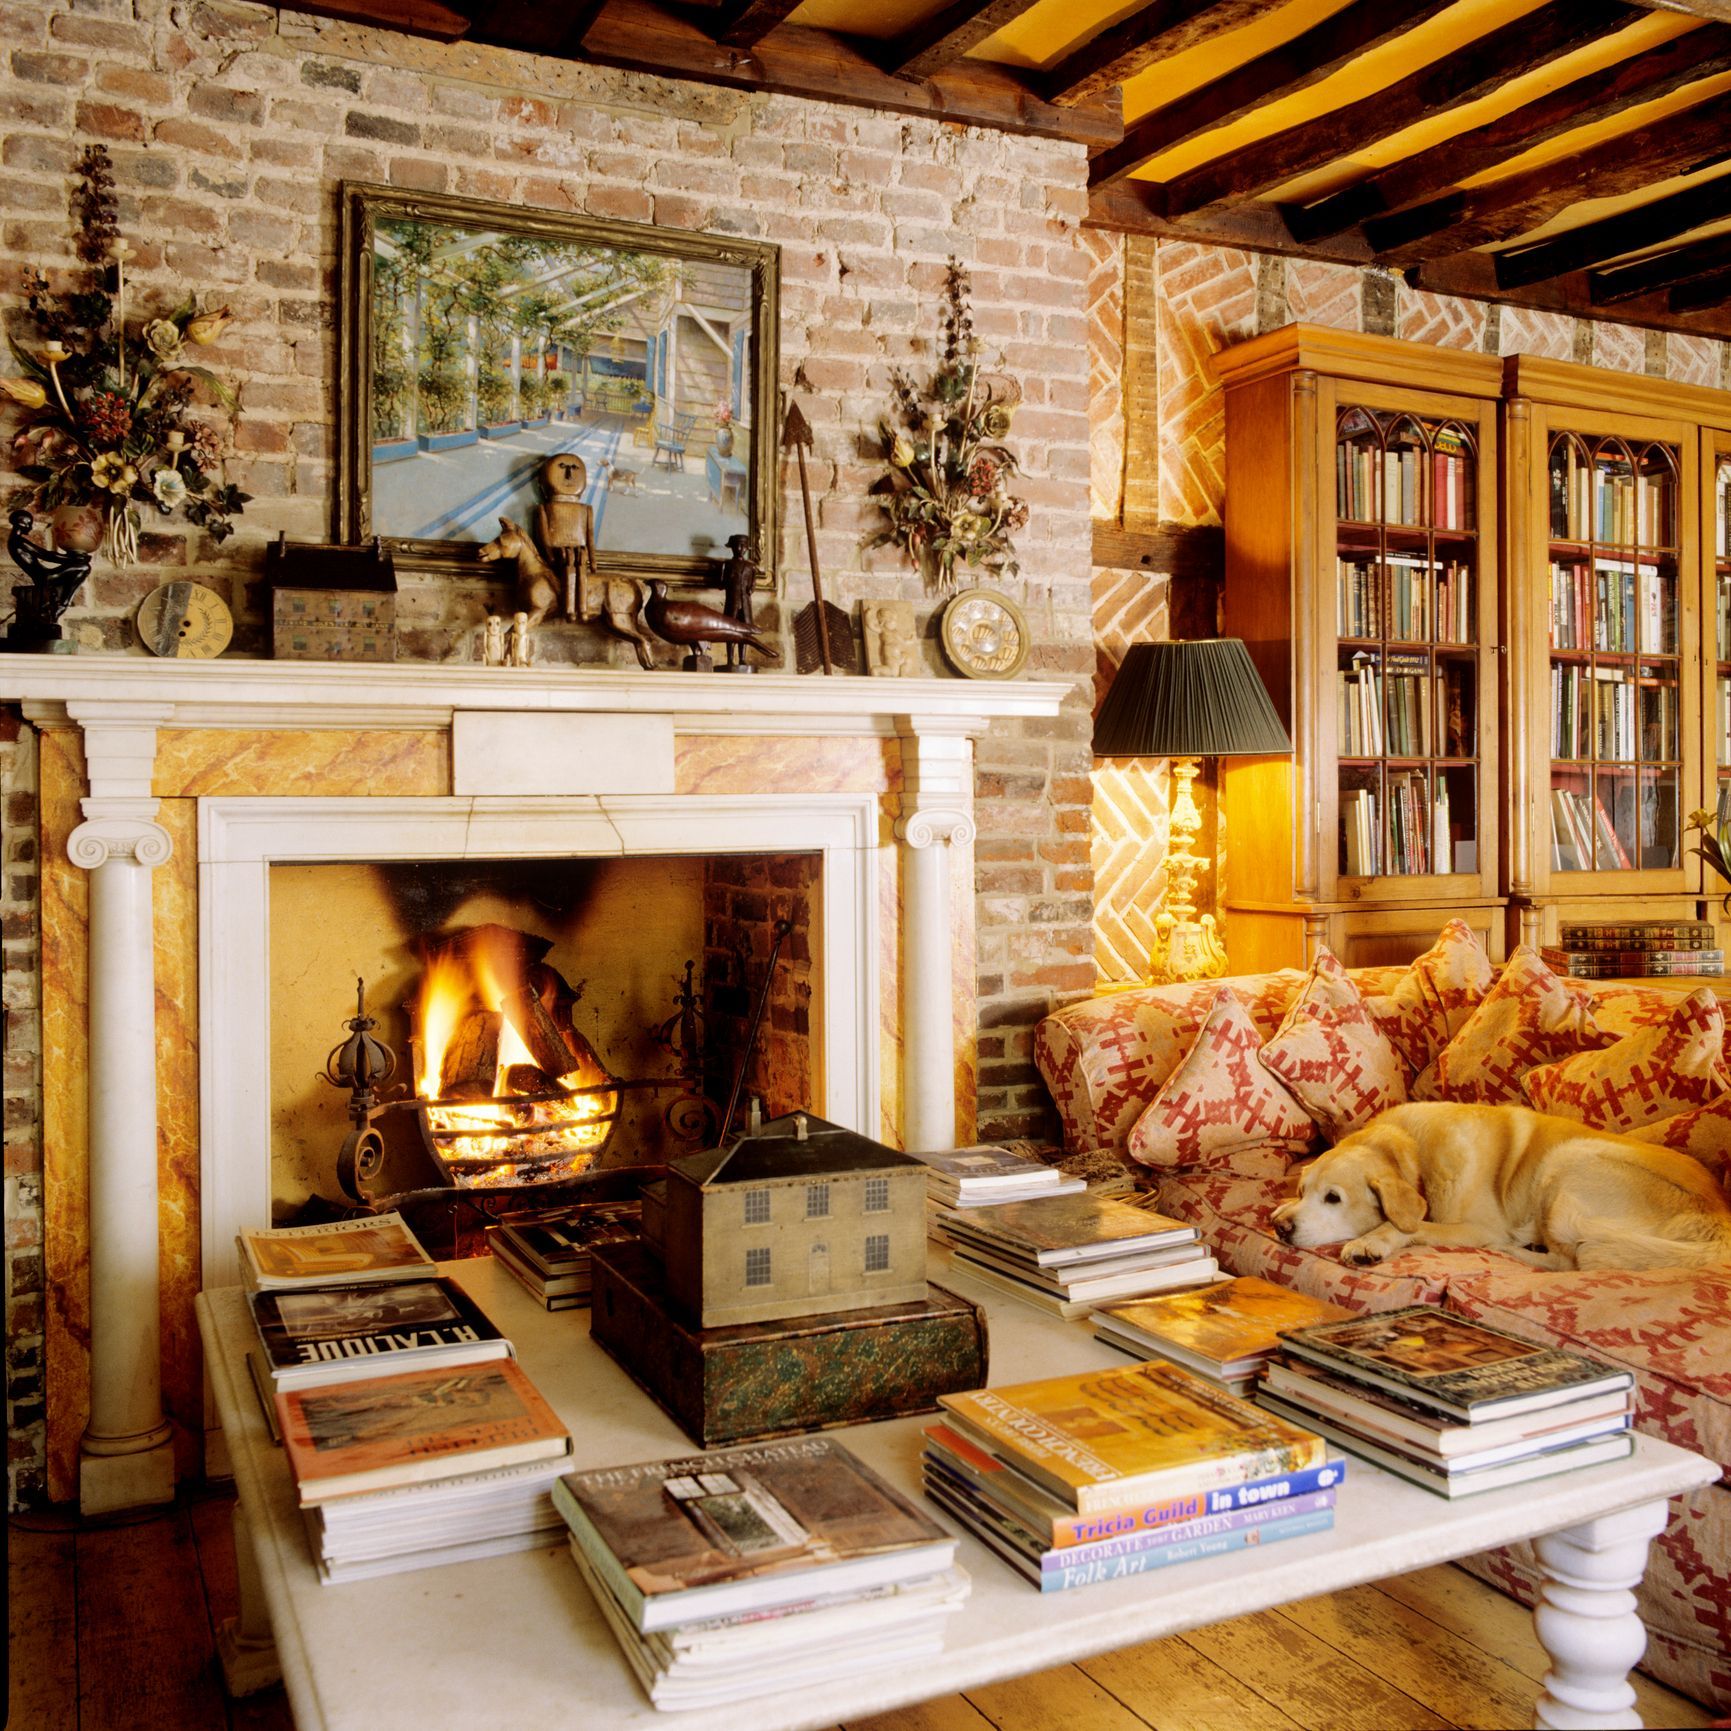 A living room with a fireplace and a table with books on it